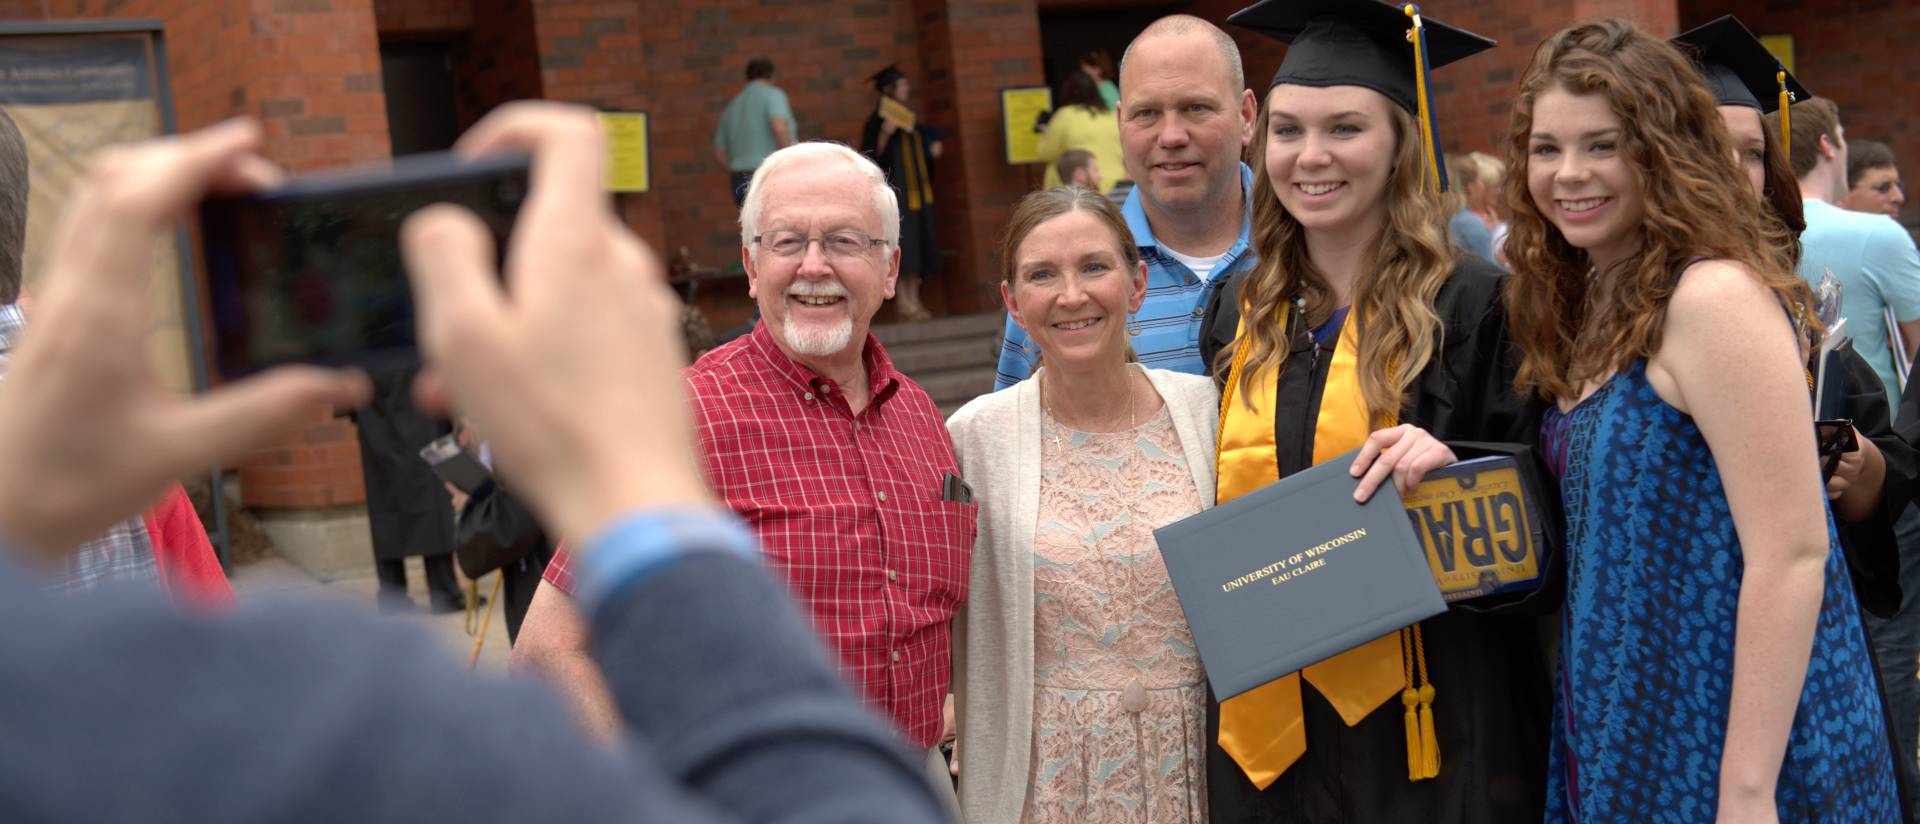 A family poses to celebrate their newest graduate.